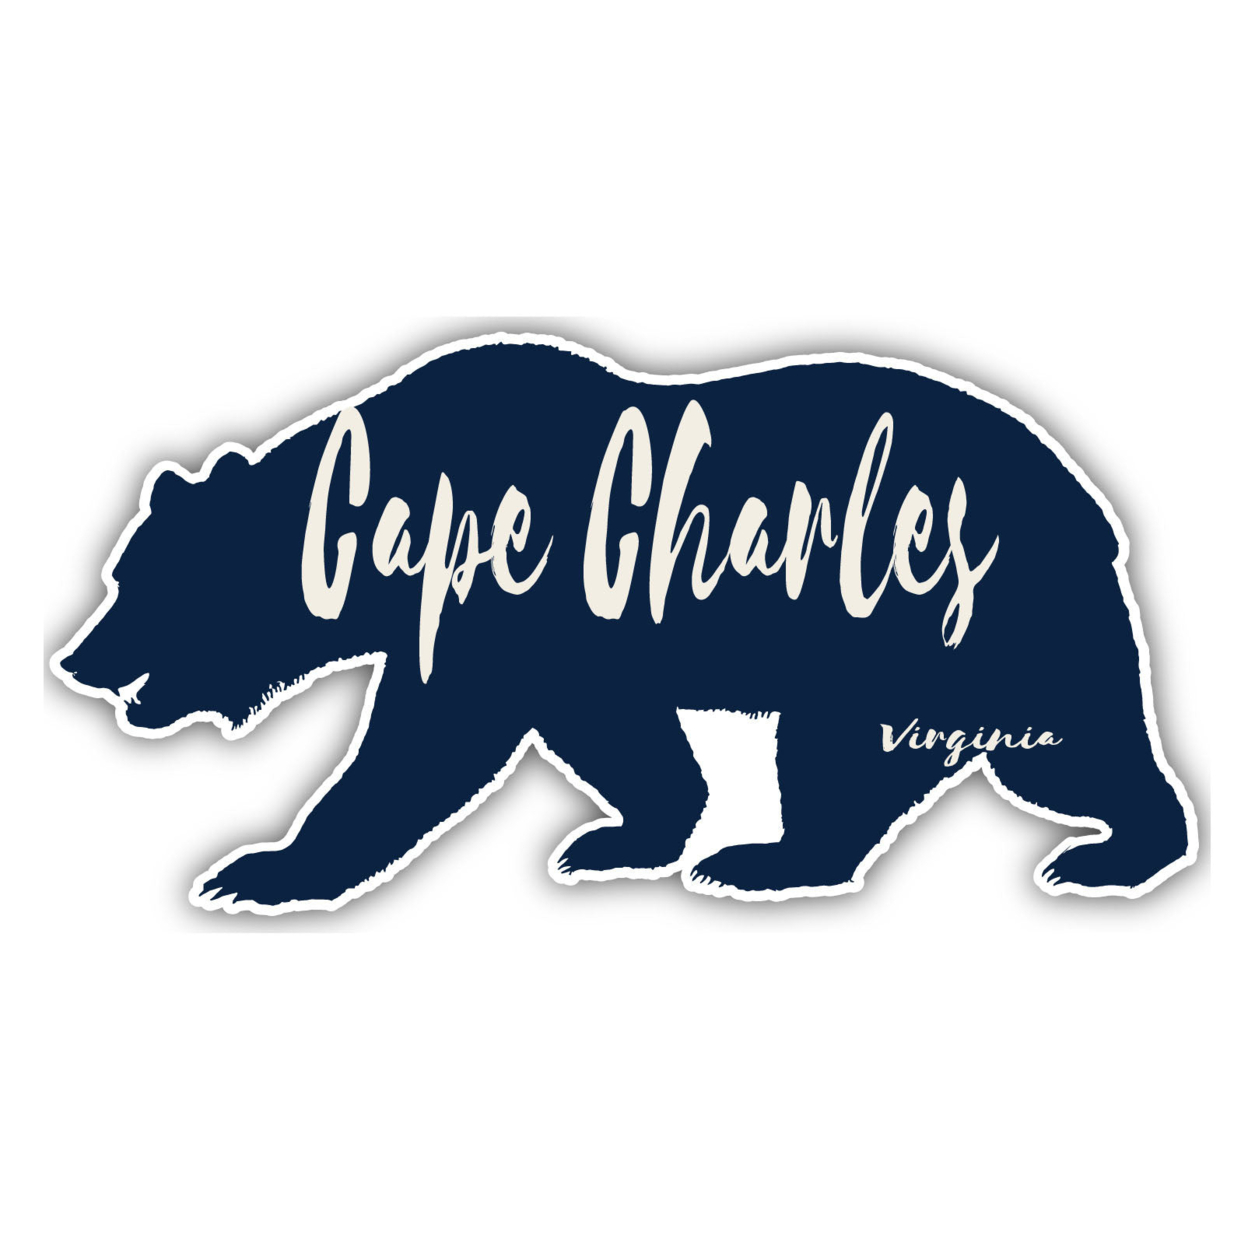 Cape Charles Virginia Souvenir Decorative Stickers (Choose Theme And Size) - 4-Pack, 10-Inch, Tent